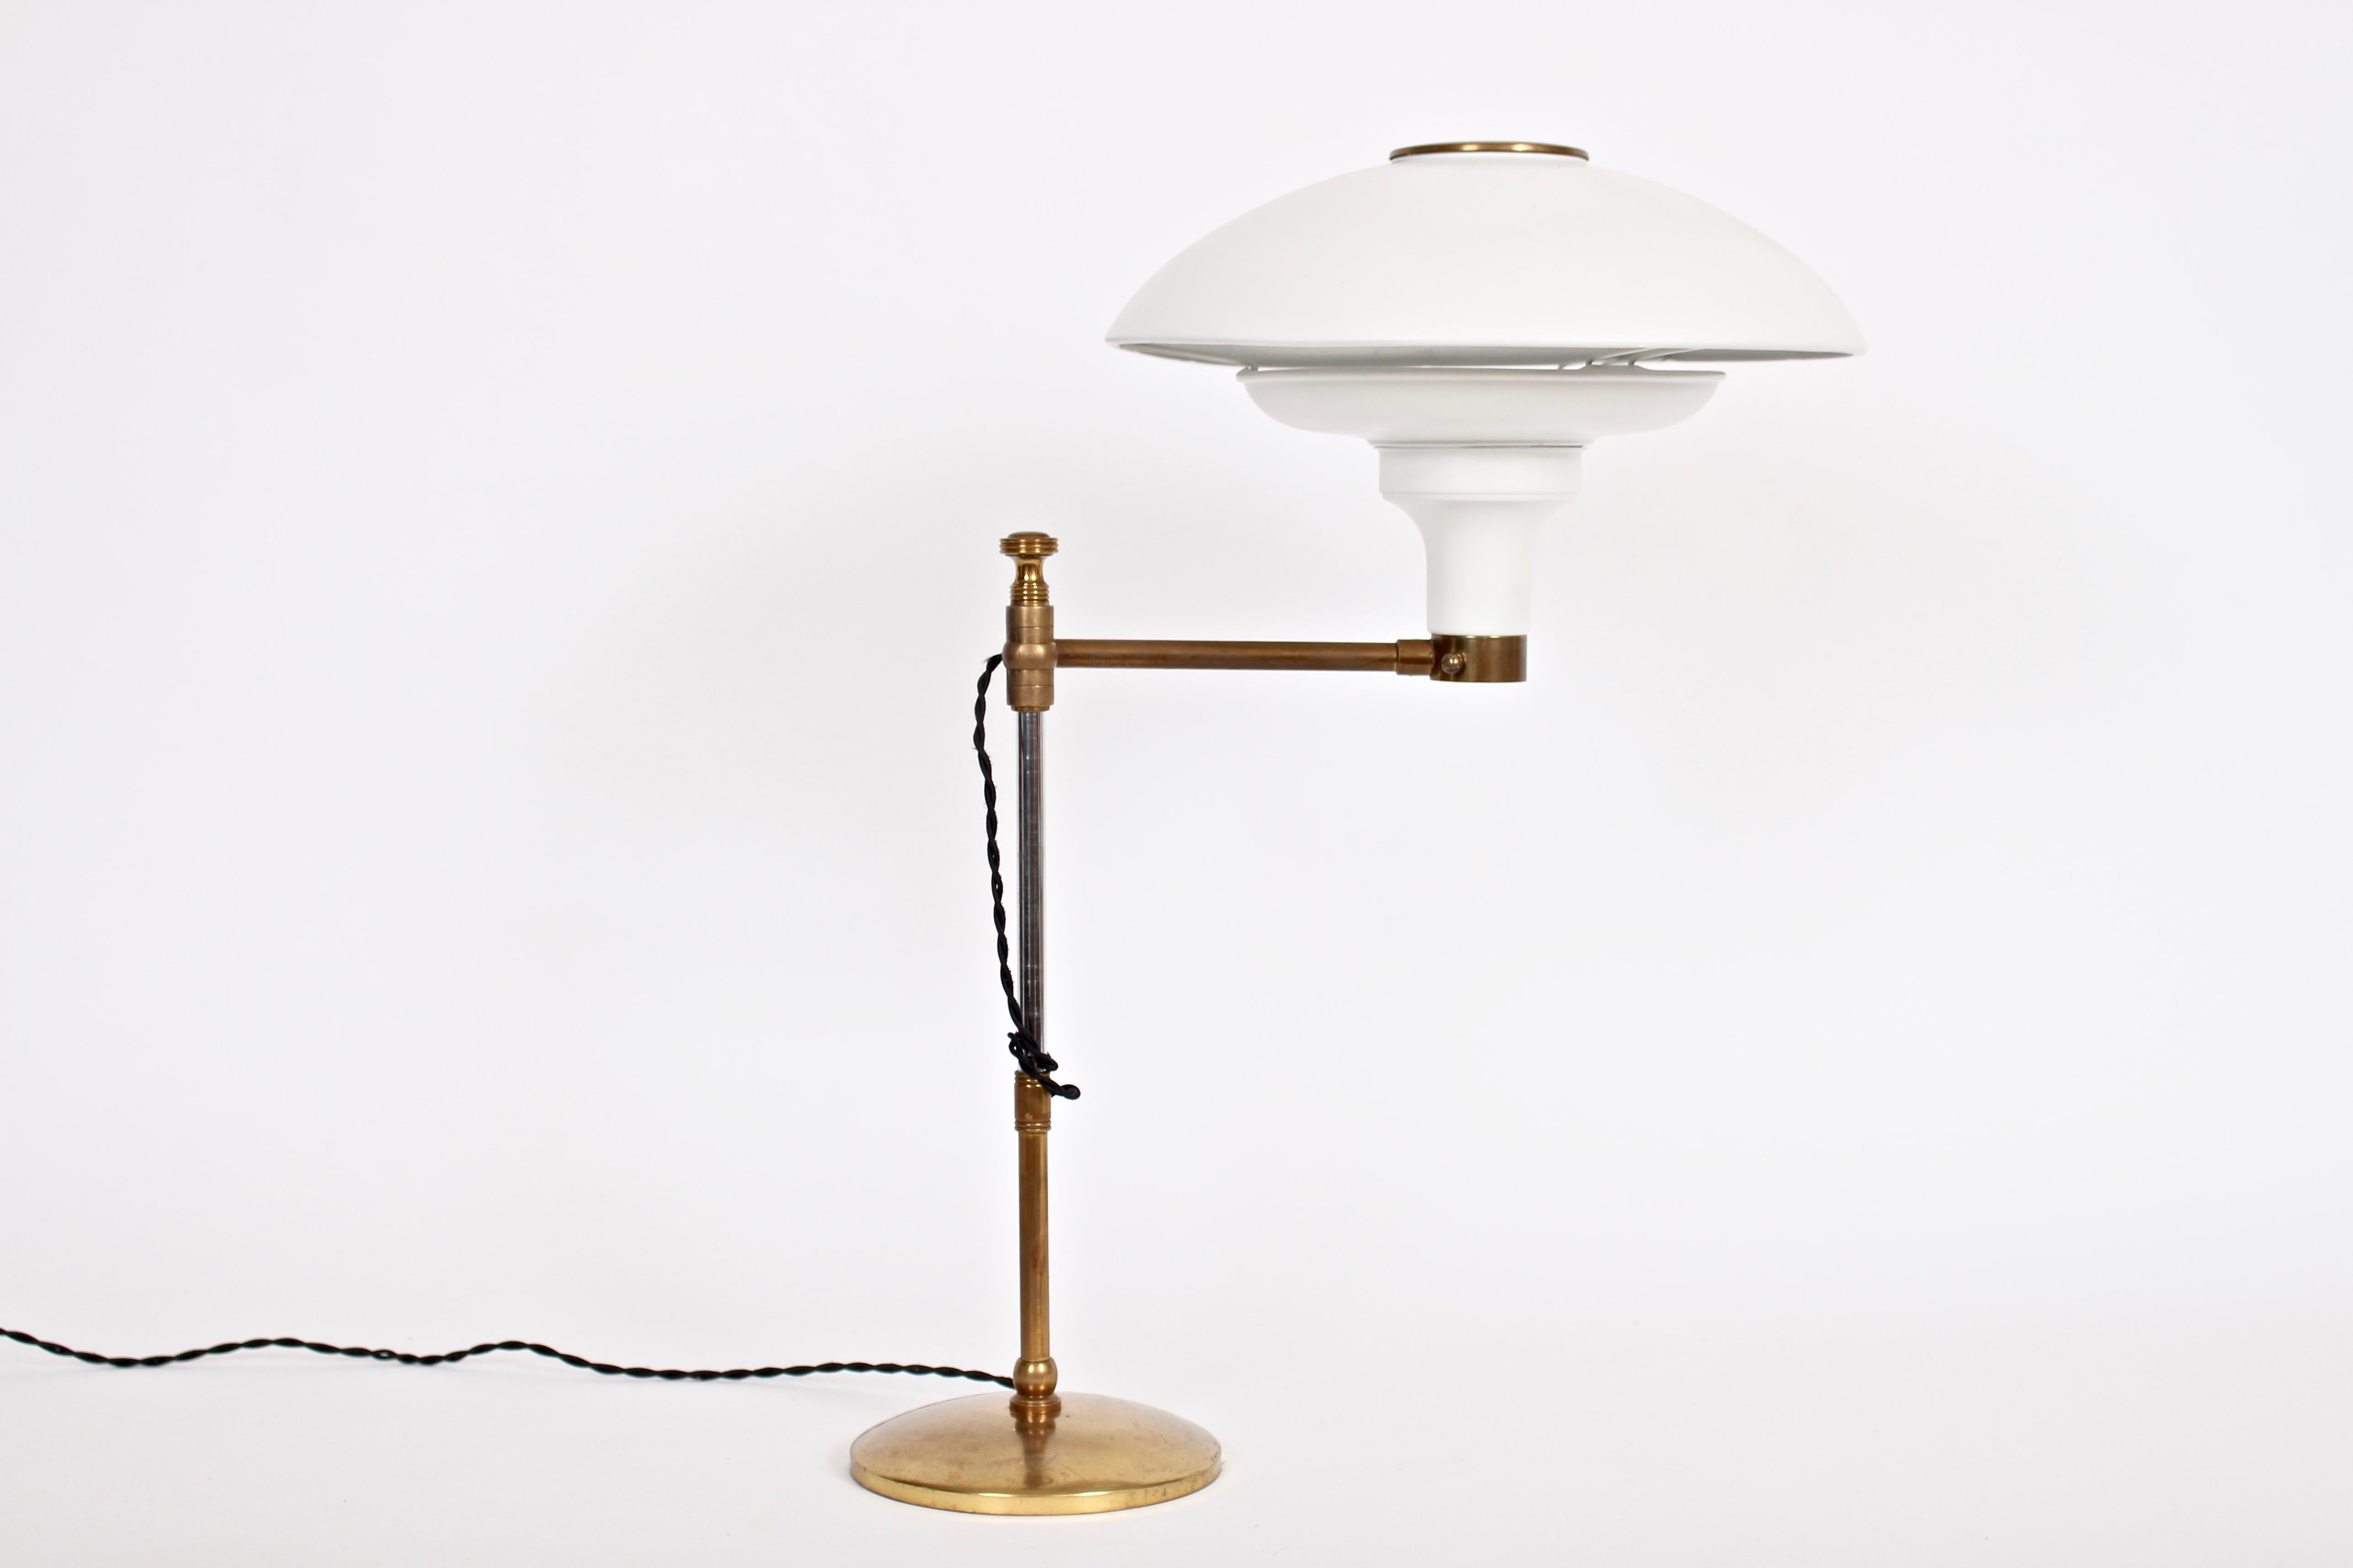 Mid-20th Century Dazor Swing Arm Brass Desk Lamp with White Reflector Shade, 1940s